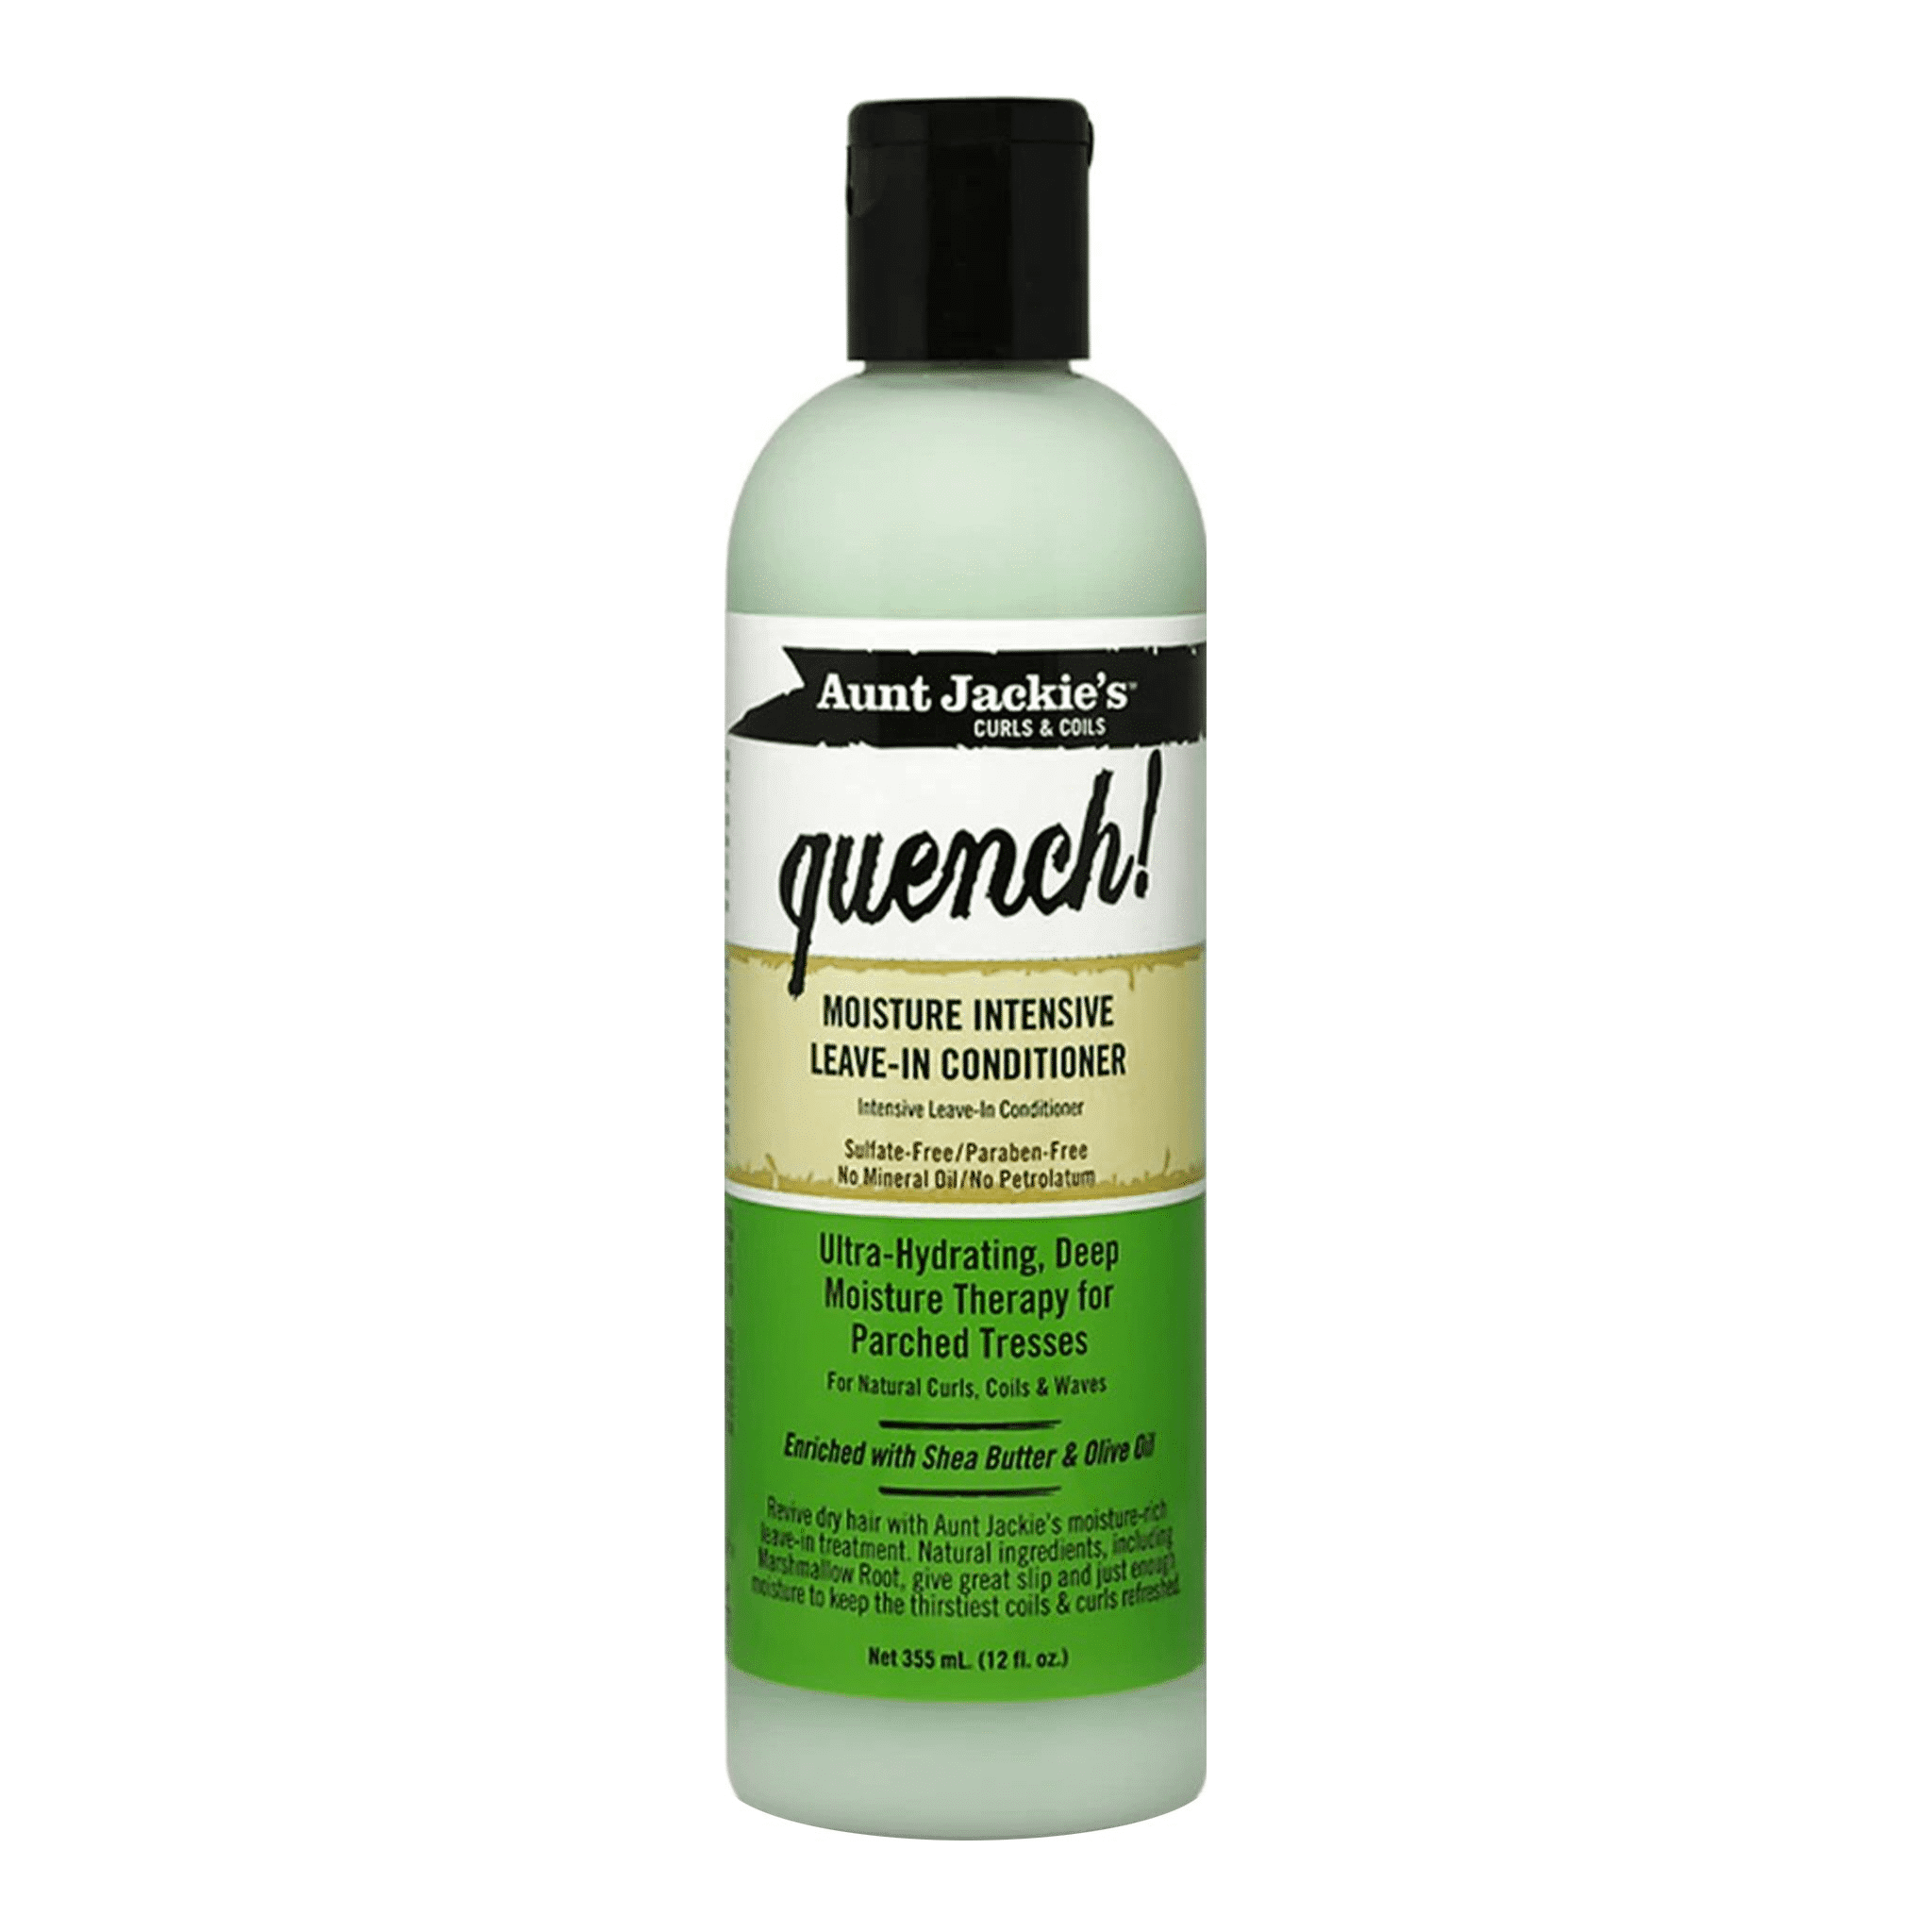 Aunt Jackie's Quench Moisture Intensive Leave-In Conditioner